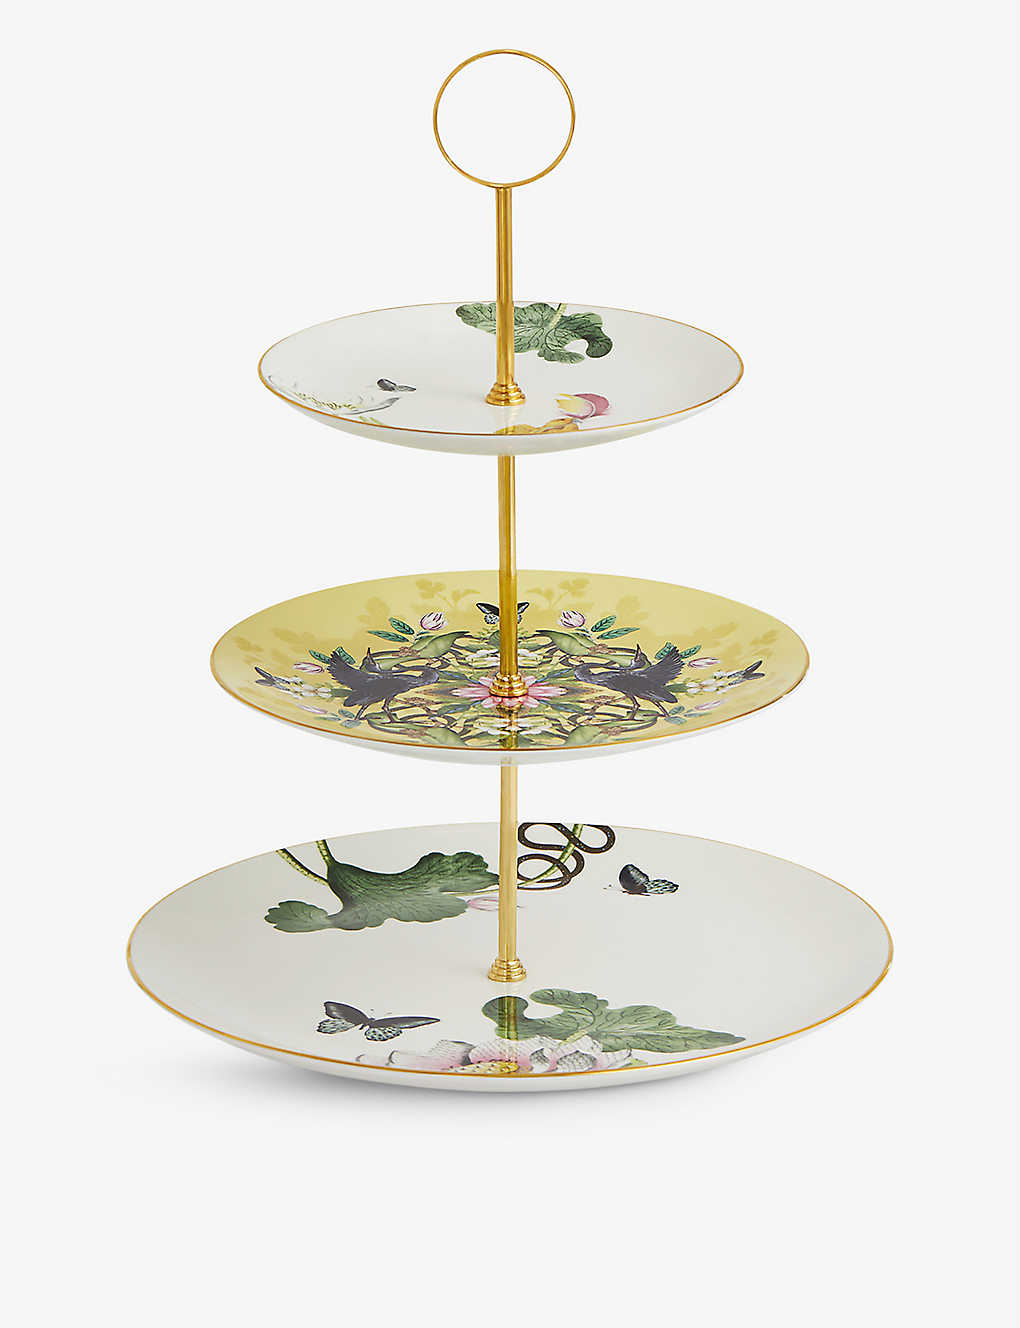 WEDGWOOD XC  OiP[LX^h Waterlily three-tier limited-edition china cake stand